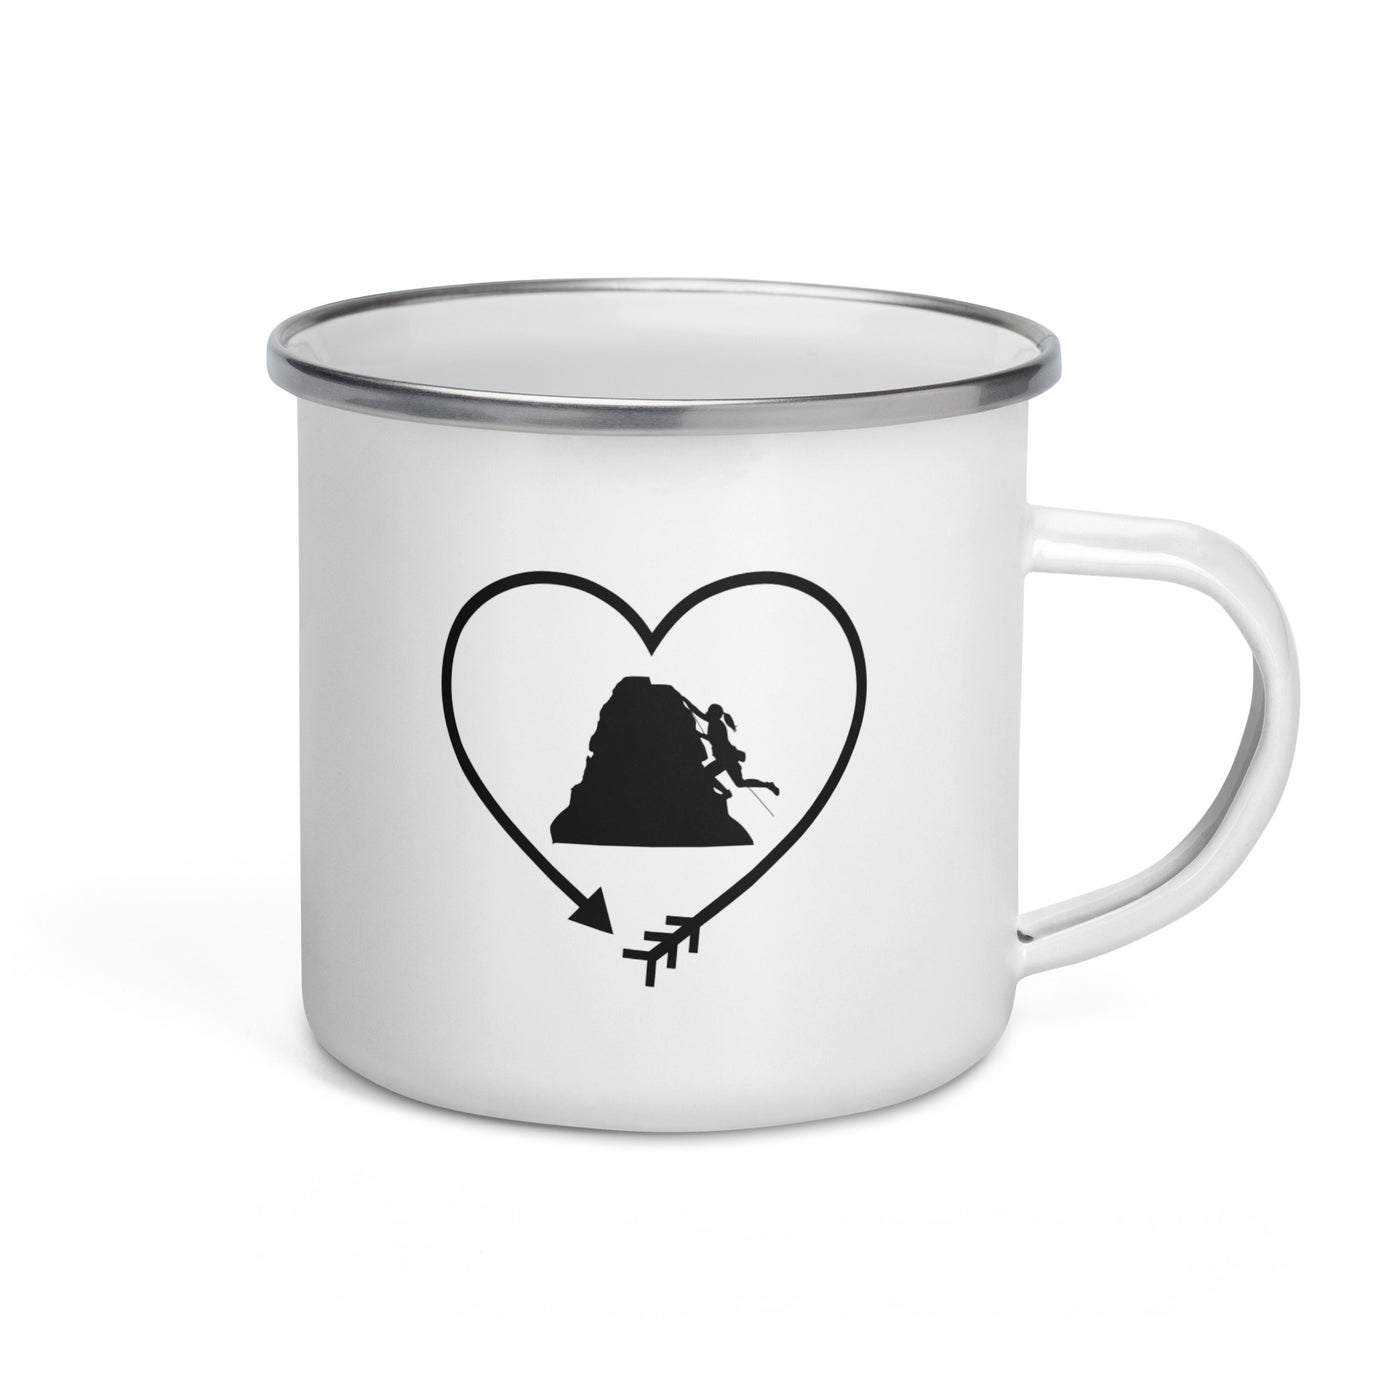 Arrow In Heartshape And Climbing 1 - Emaille Tasse klettern Default Title